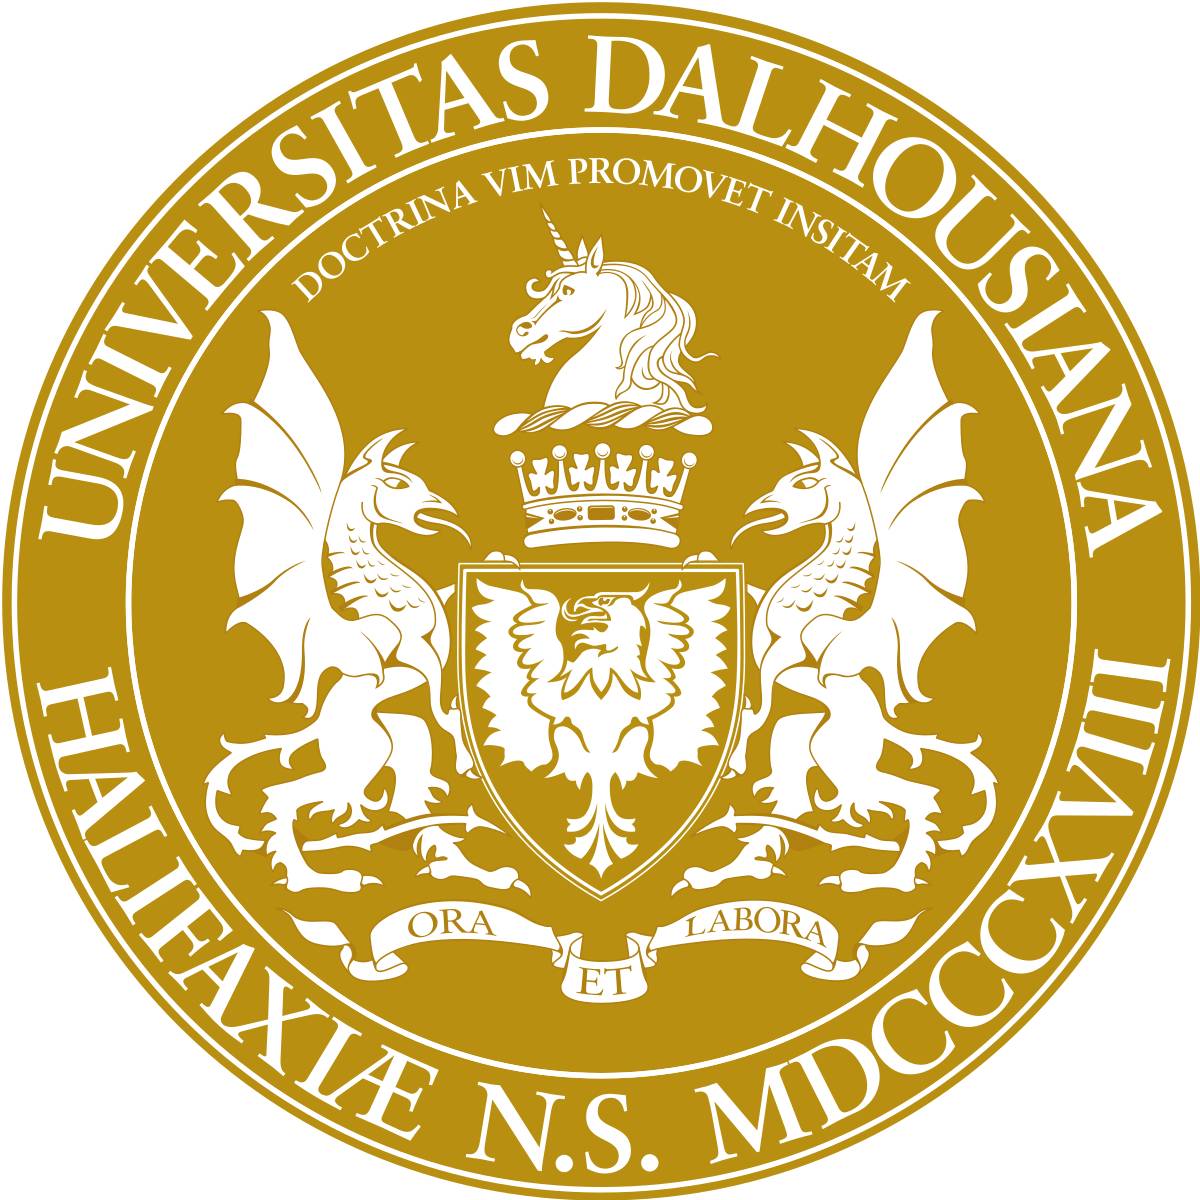 Dalhousie University's official seal or crest